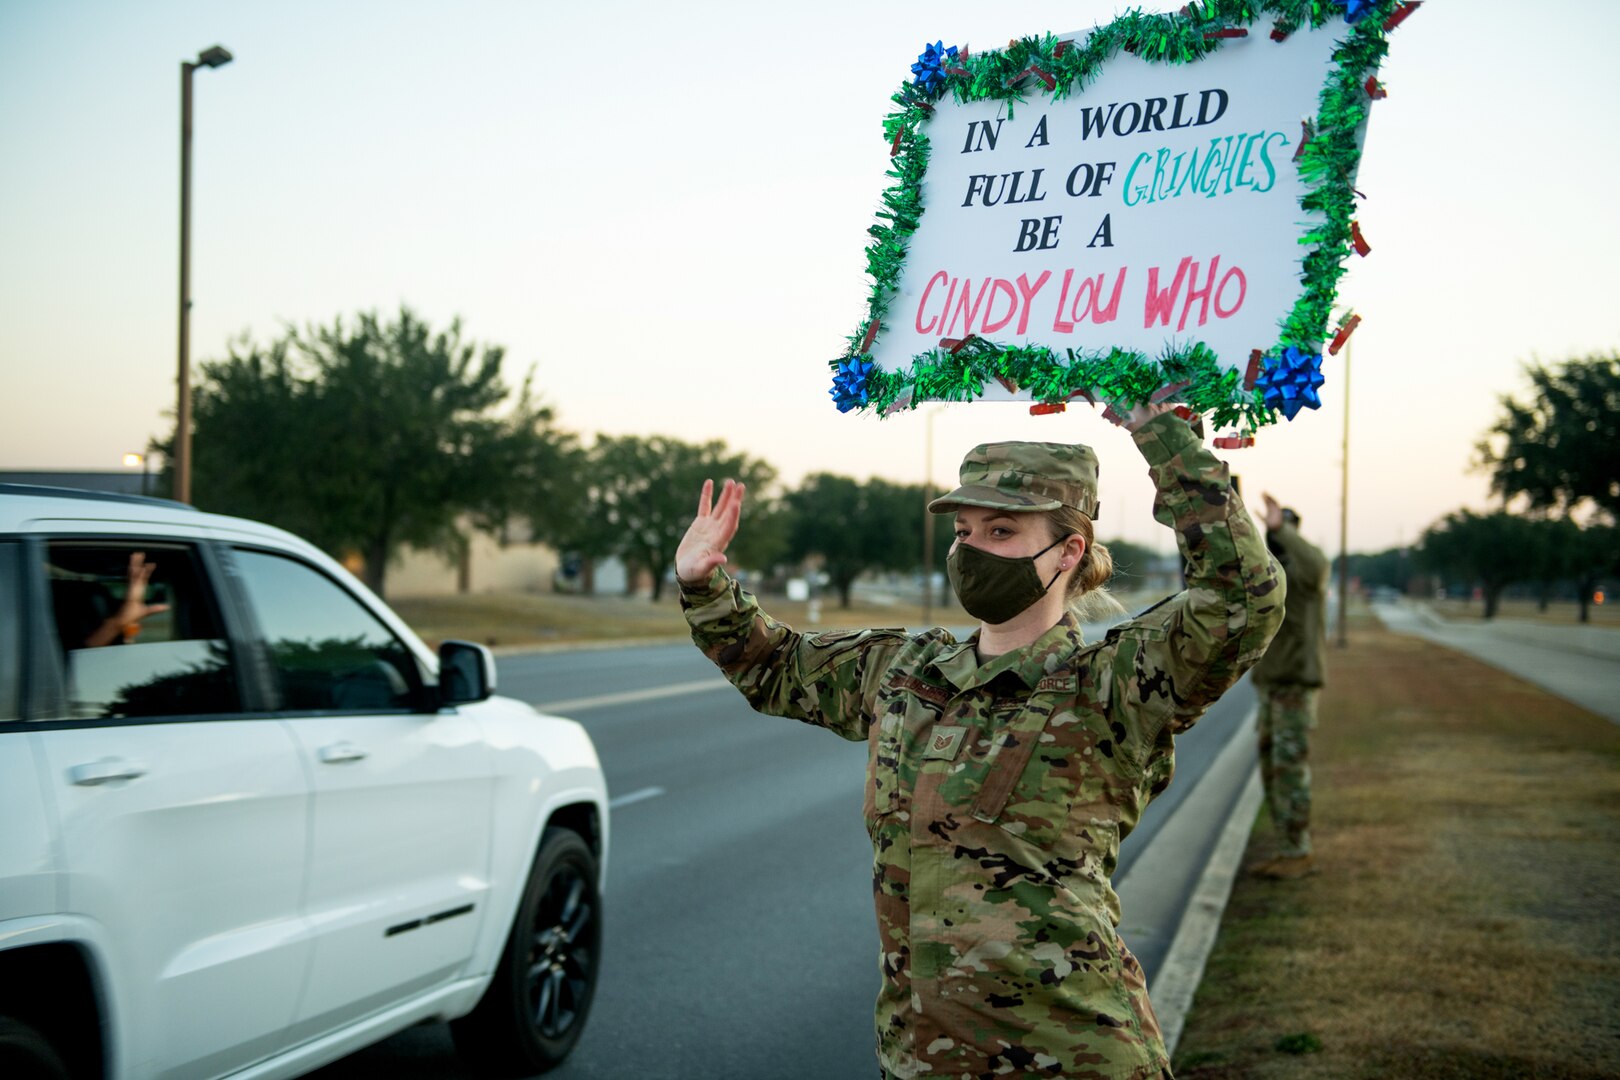 U.S. Air Force Tech. Sgt. Cassandra Elchelberger, Air Force Services Center, holds signs to spread holiday cheer for drivers to see Dec. 18, 2020, at Joint Base San Antonio-Lackland, Texas.